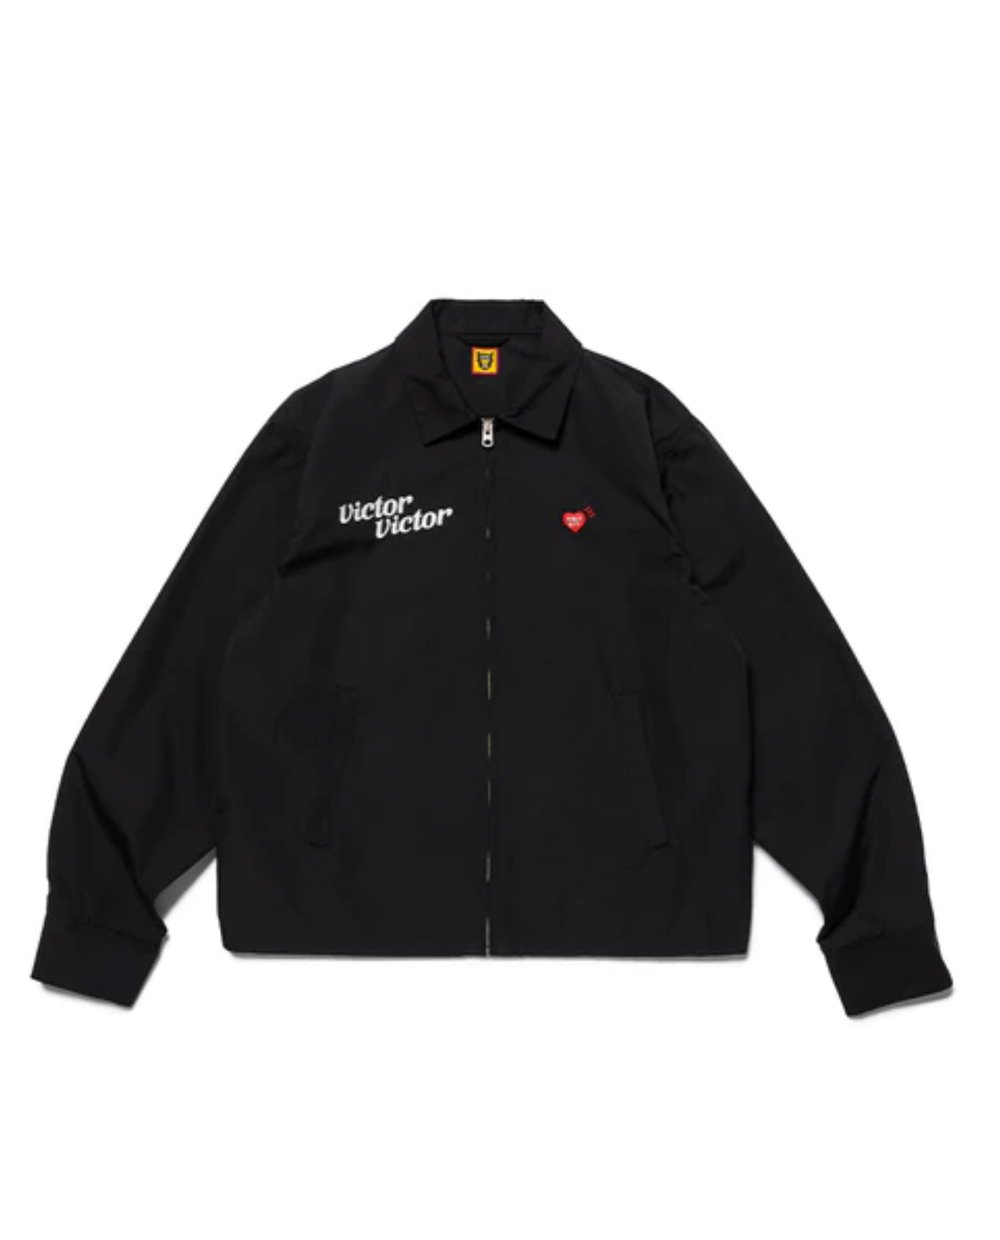 VICTOR VICTOR X HUMAN MADE DRIZZLER JACKET